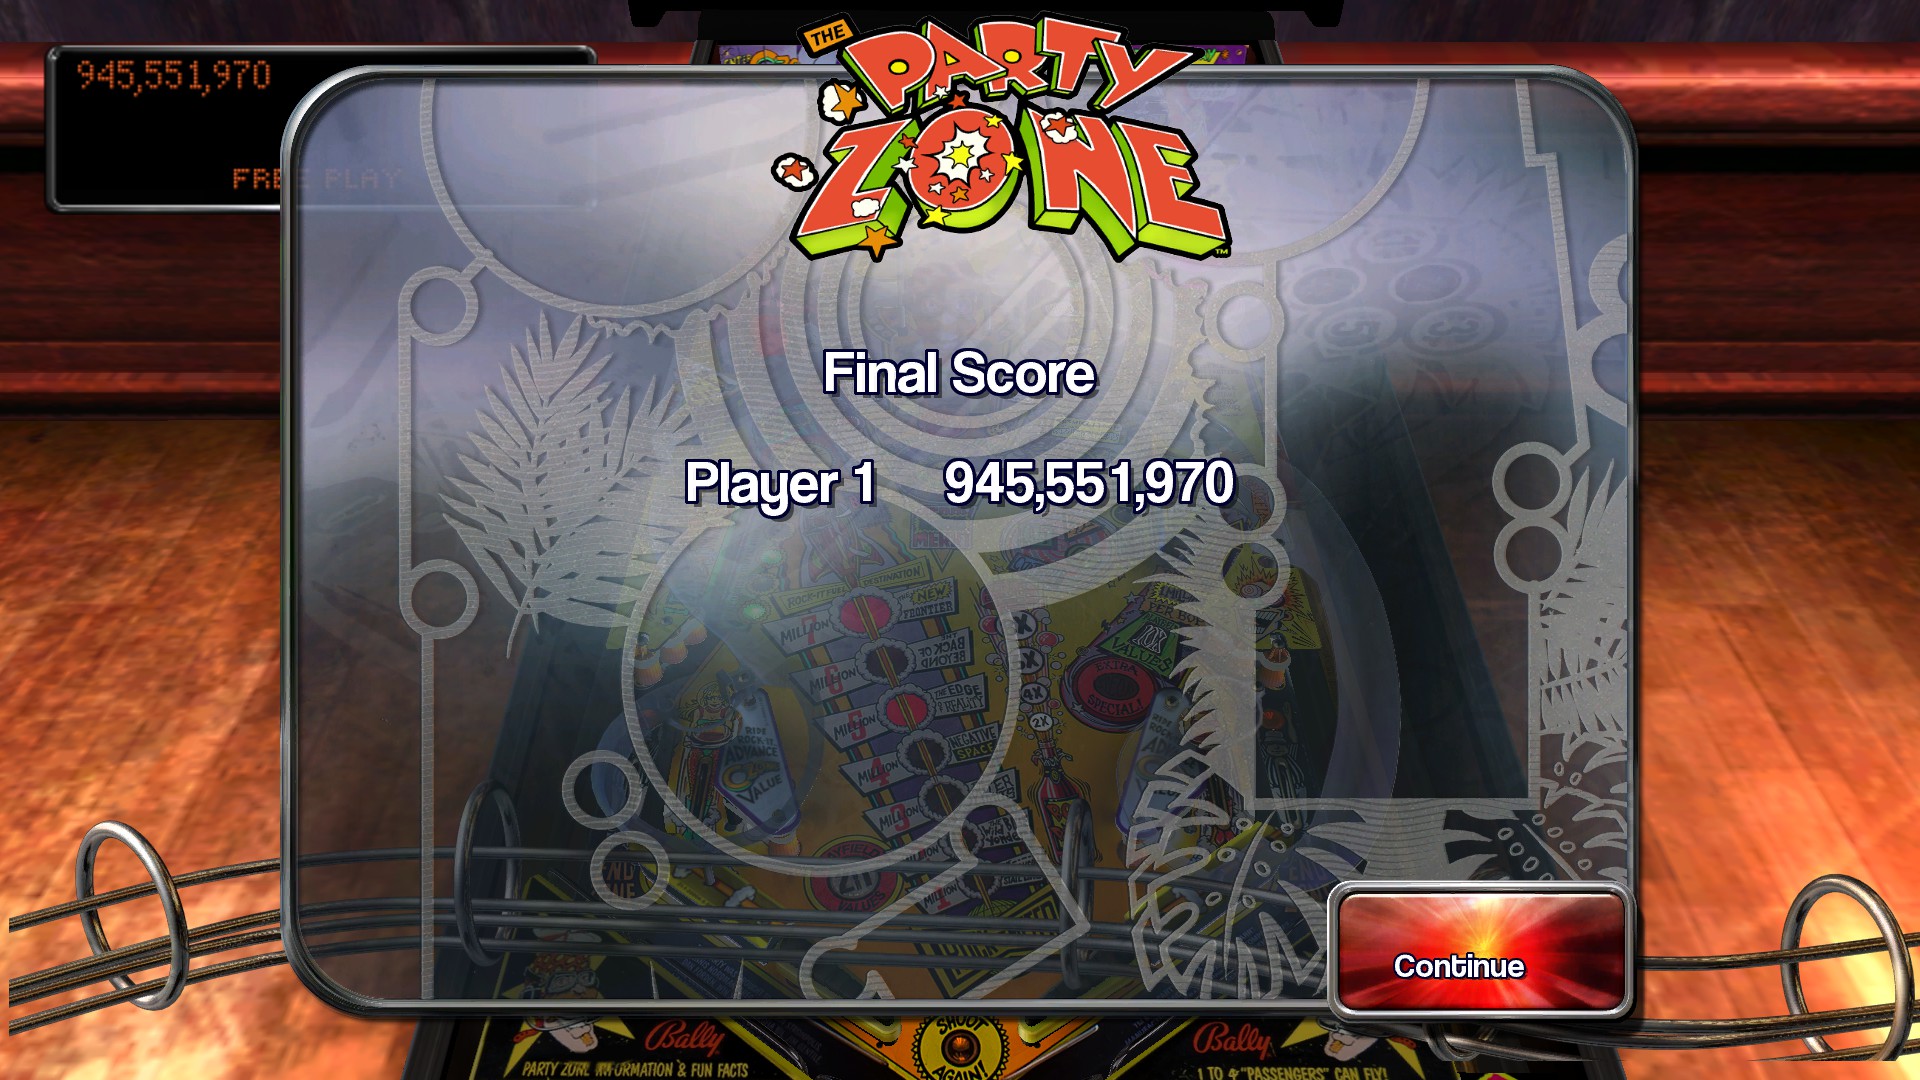 TheTrickster: Pinball Arcade: Party Zone (PC) 945,551,970 points on 2016-05-20 08:35:39